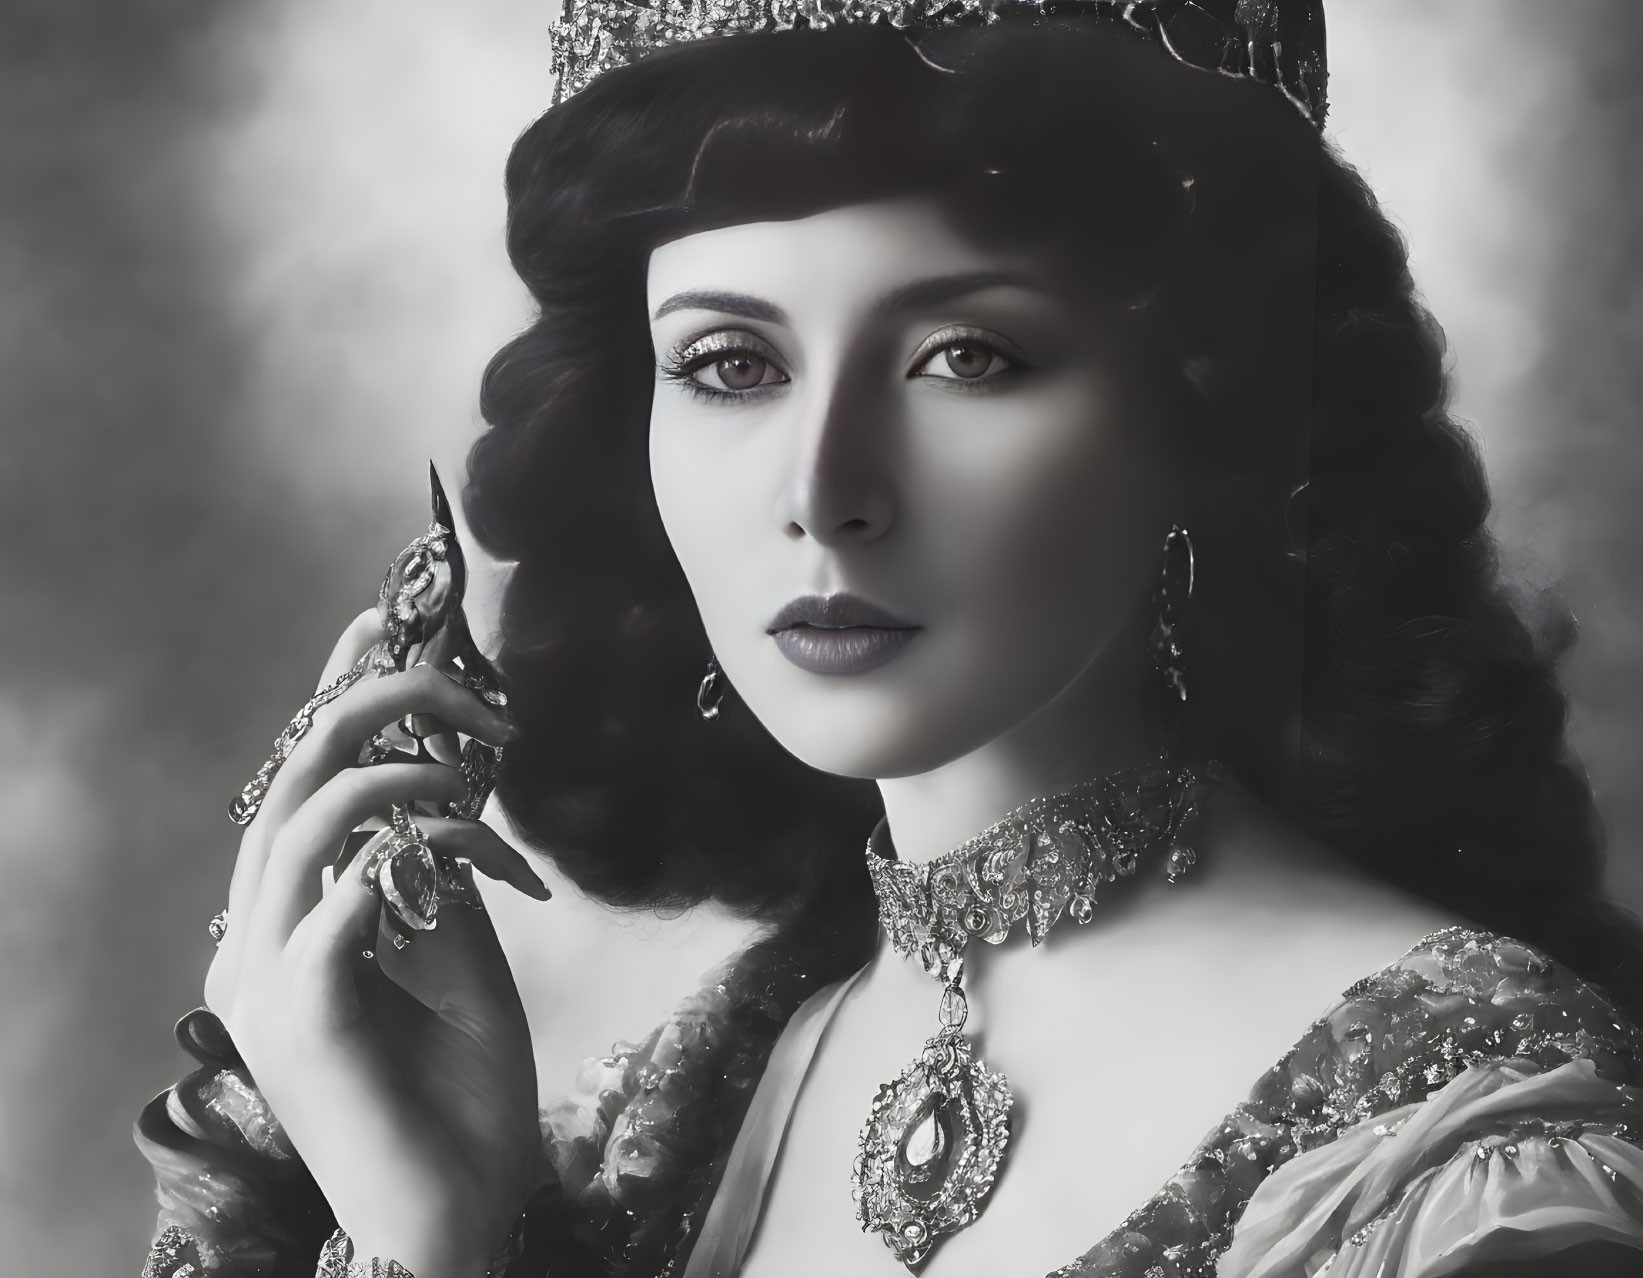 Vintage portrait of elegant woman in intricate jewelry and tiara, black and white.